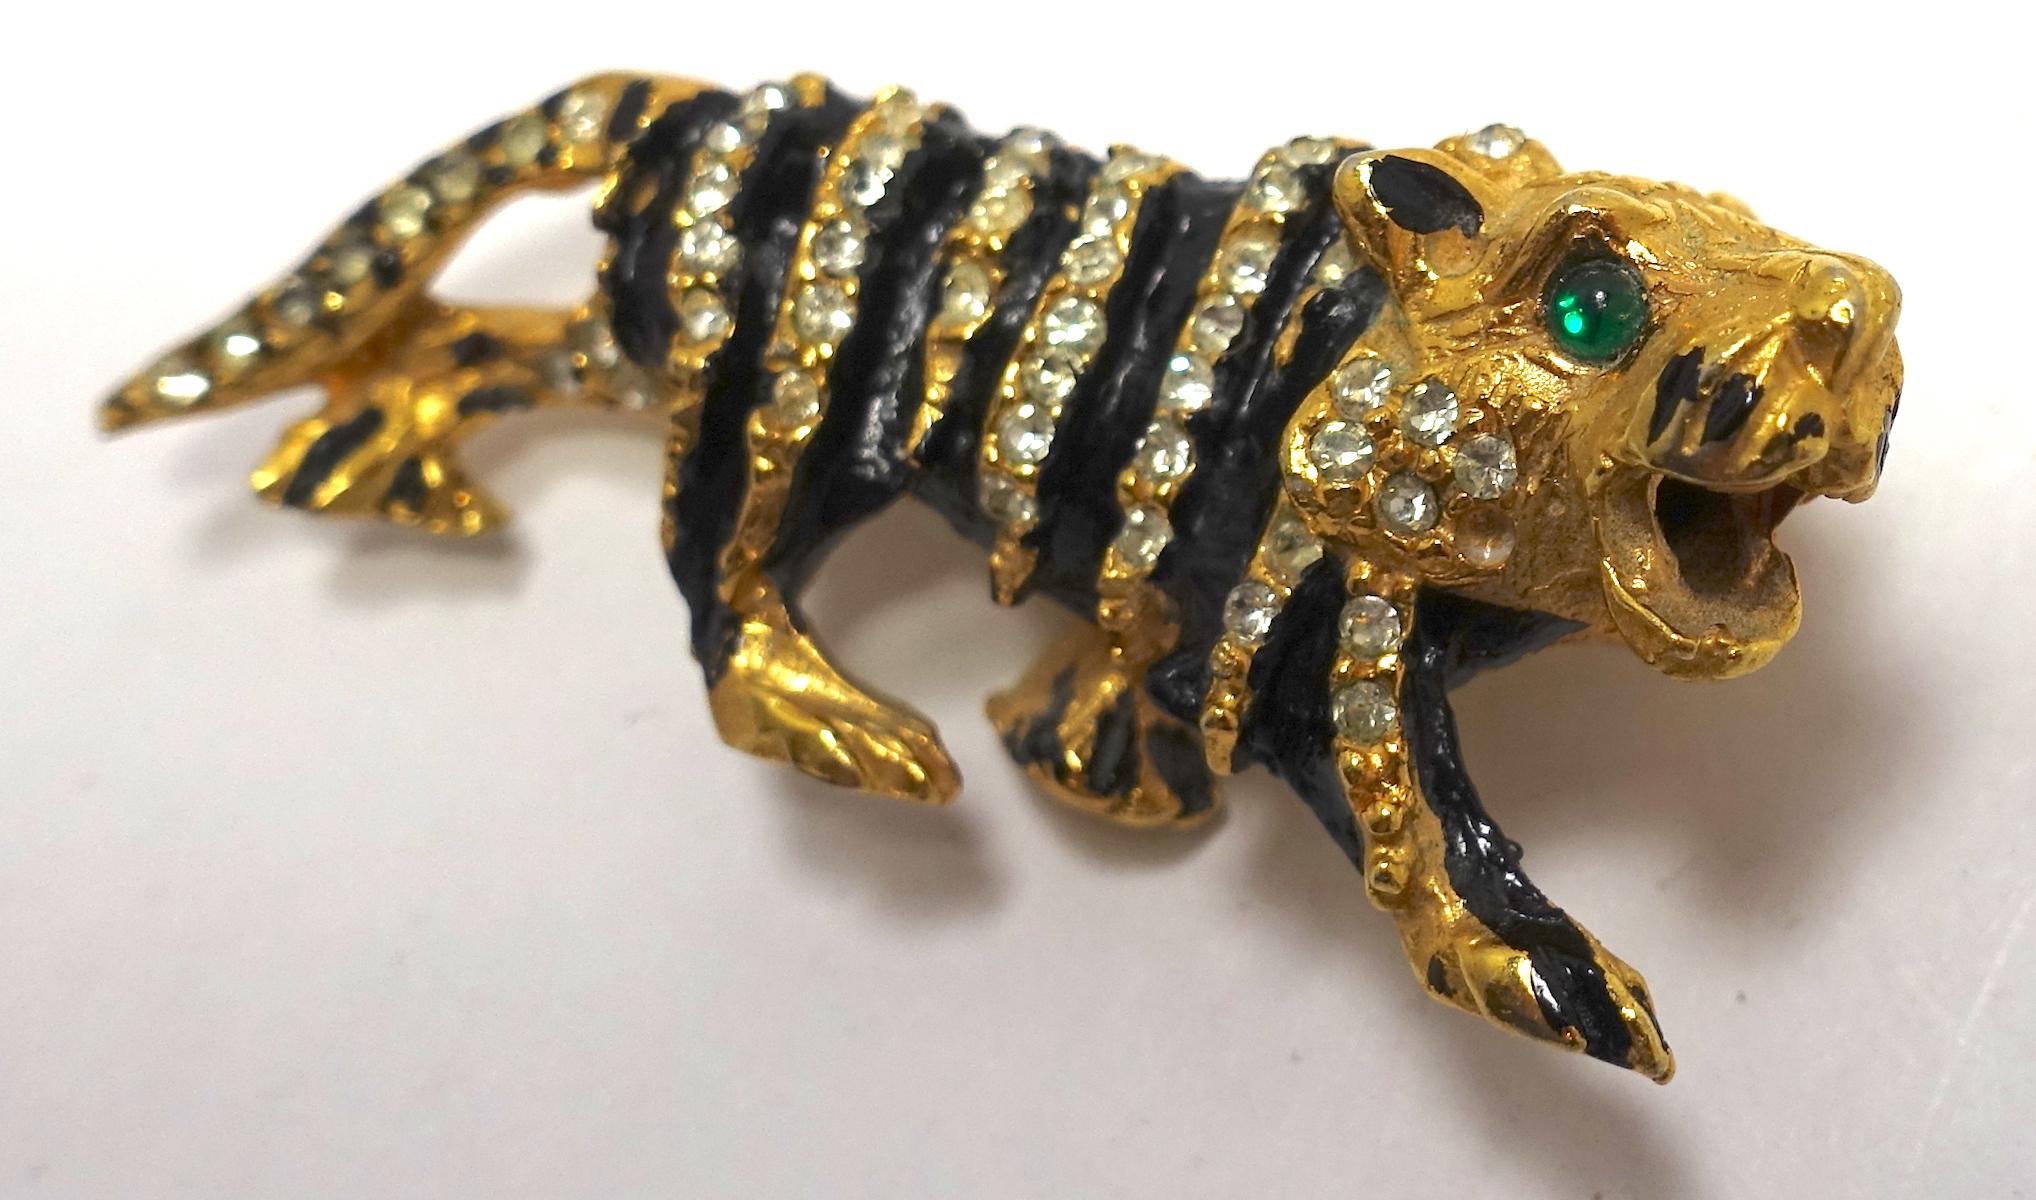 This vintage tiger brooch bears the old “K.J.L.” signature from the 1960s. This piece has black enameling with clear and green crystal accents in a gold-tone setting.  This brooch measures 2-1/4” x 7/8”, is signed “K.J.L.”, and is in excellent